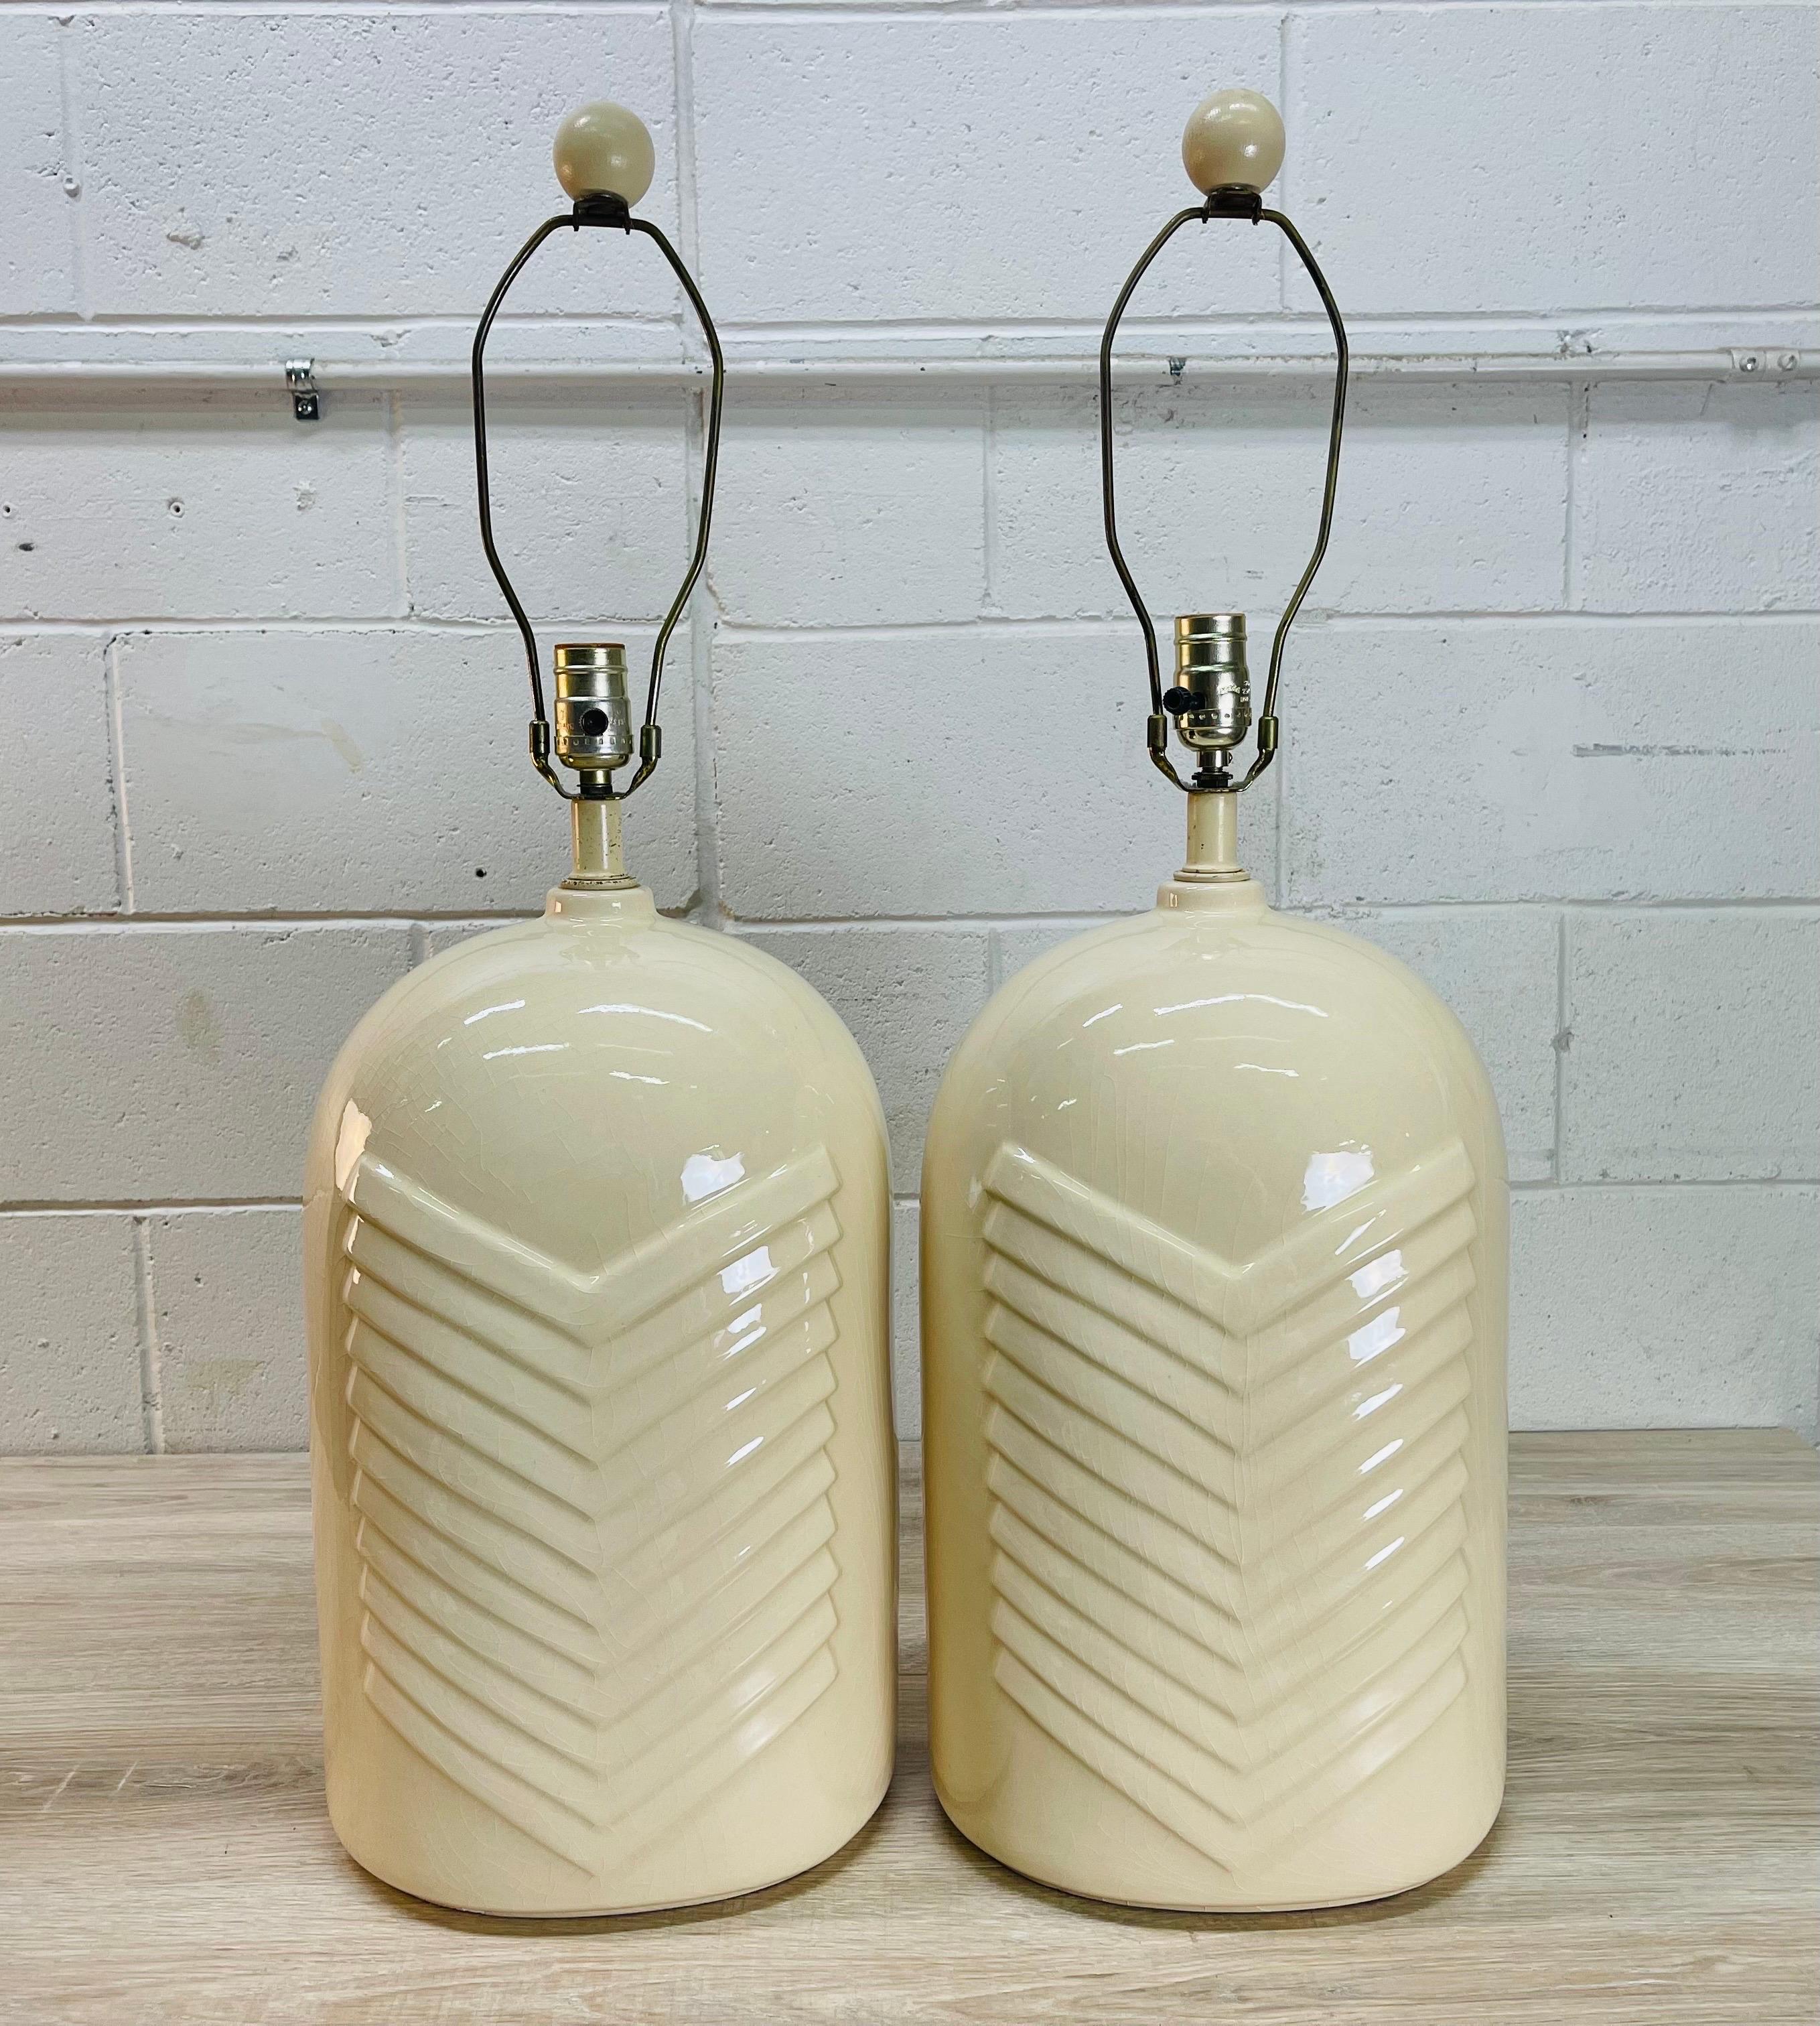 Vintage 1970s pair of white ceramic table lamps with a chevron design. The lamps also have a craze in the glaze all over the lamps and is part of the design. Both lamps come with round ball wood finials. Wired for the US and in working condition.